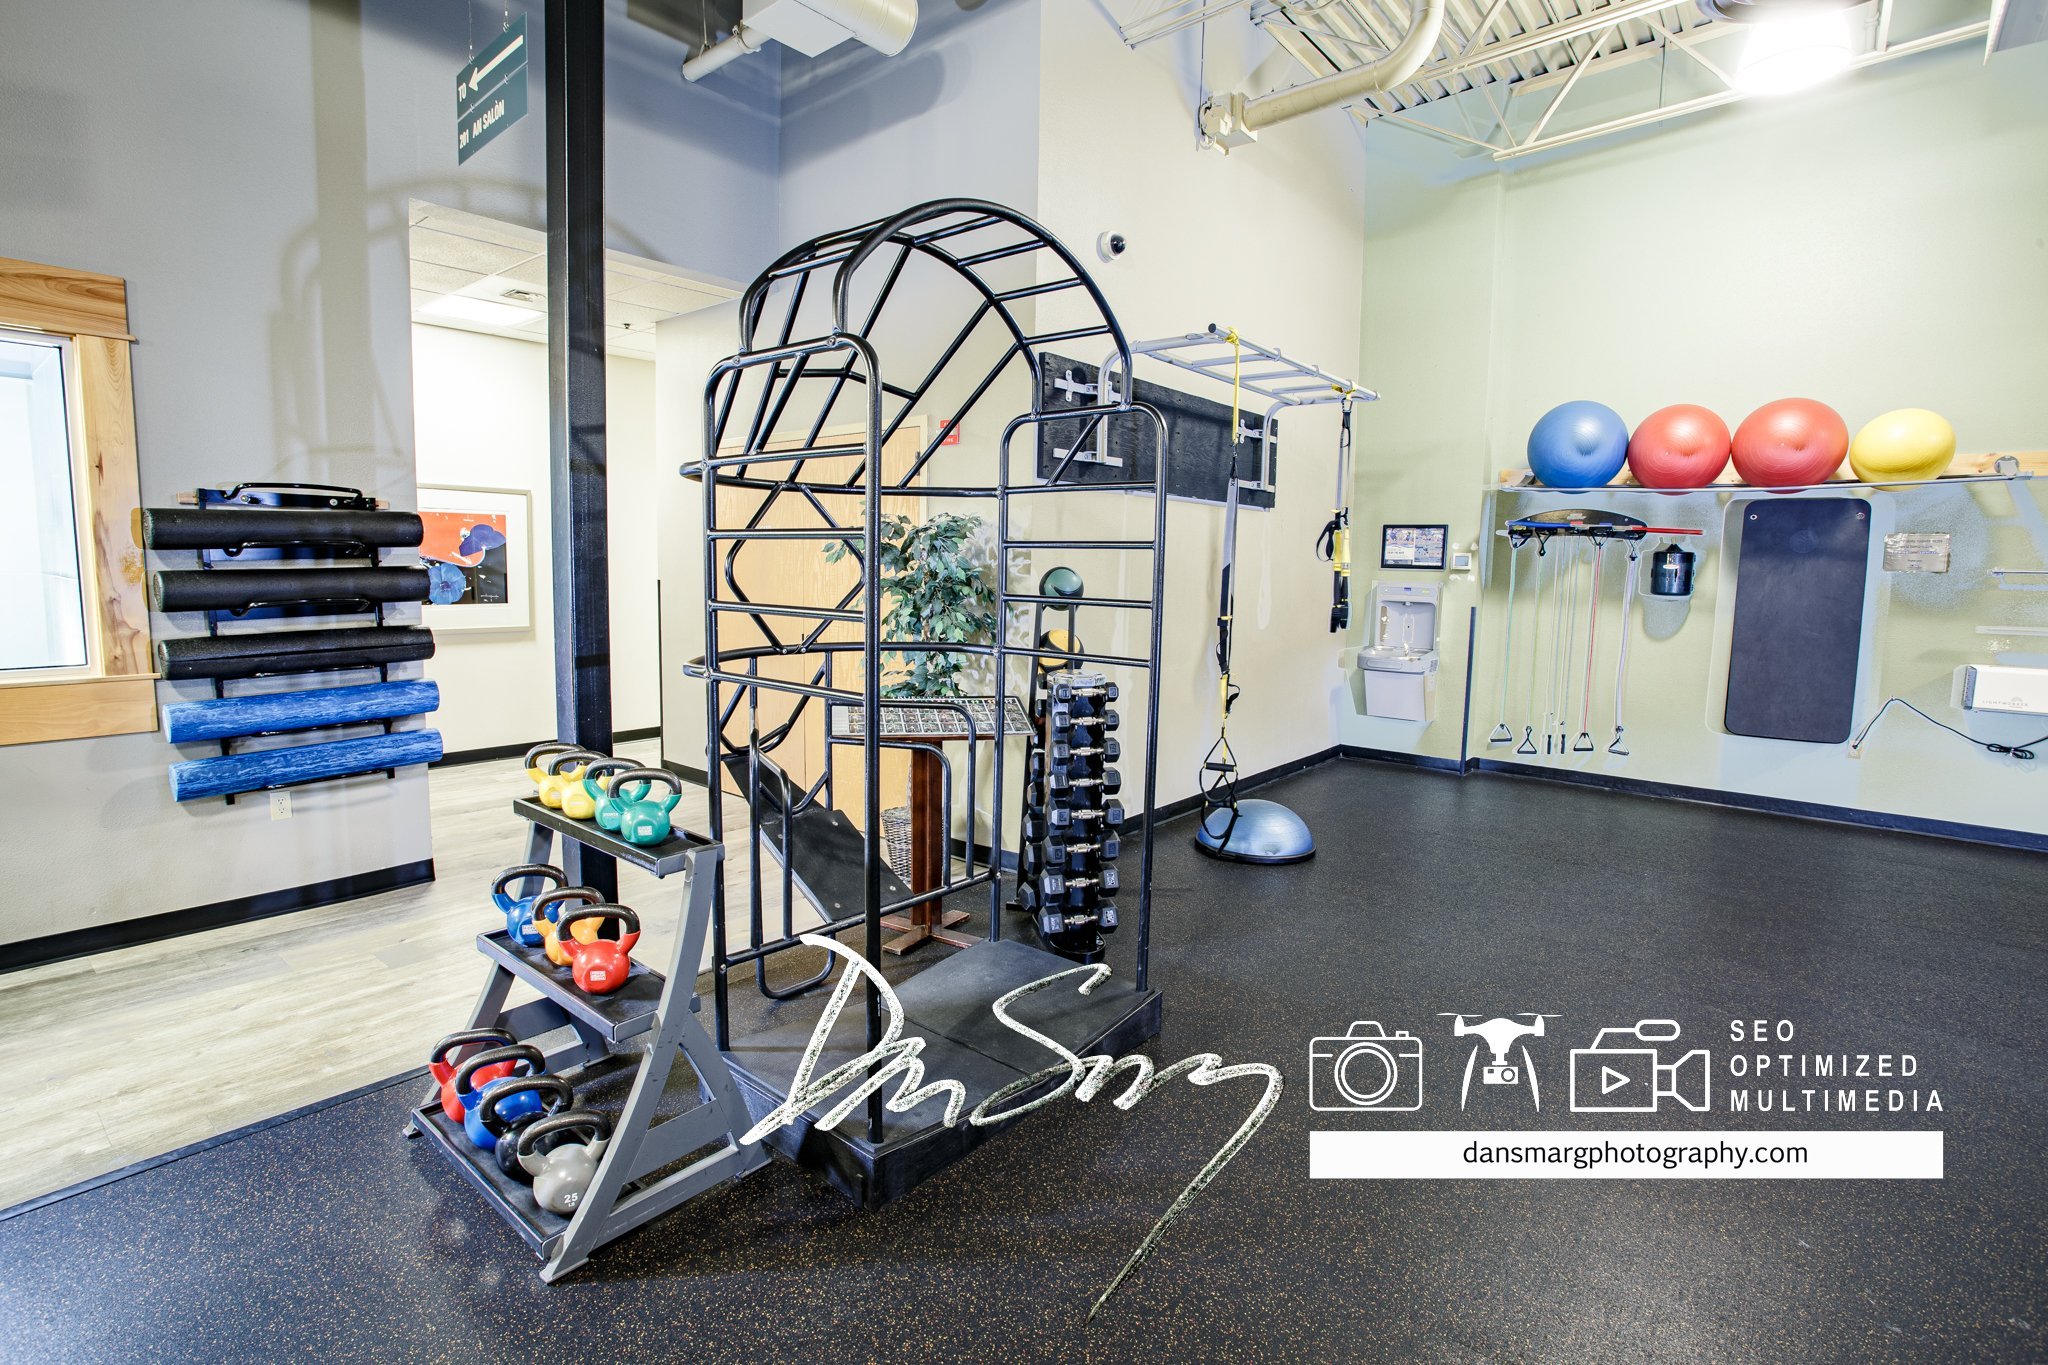 DanSmargPhotography.com-SEO-Optimmized-Multimedia-Content-The-Wave-Fitness-Center-Whitefish-Montana-17.jpg